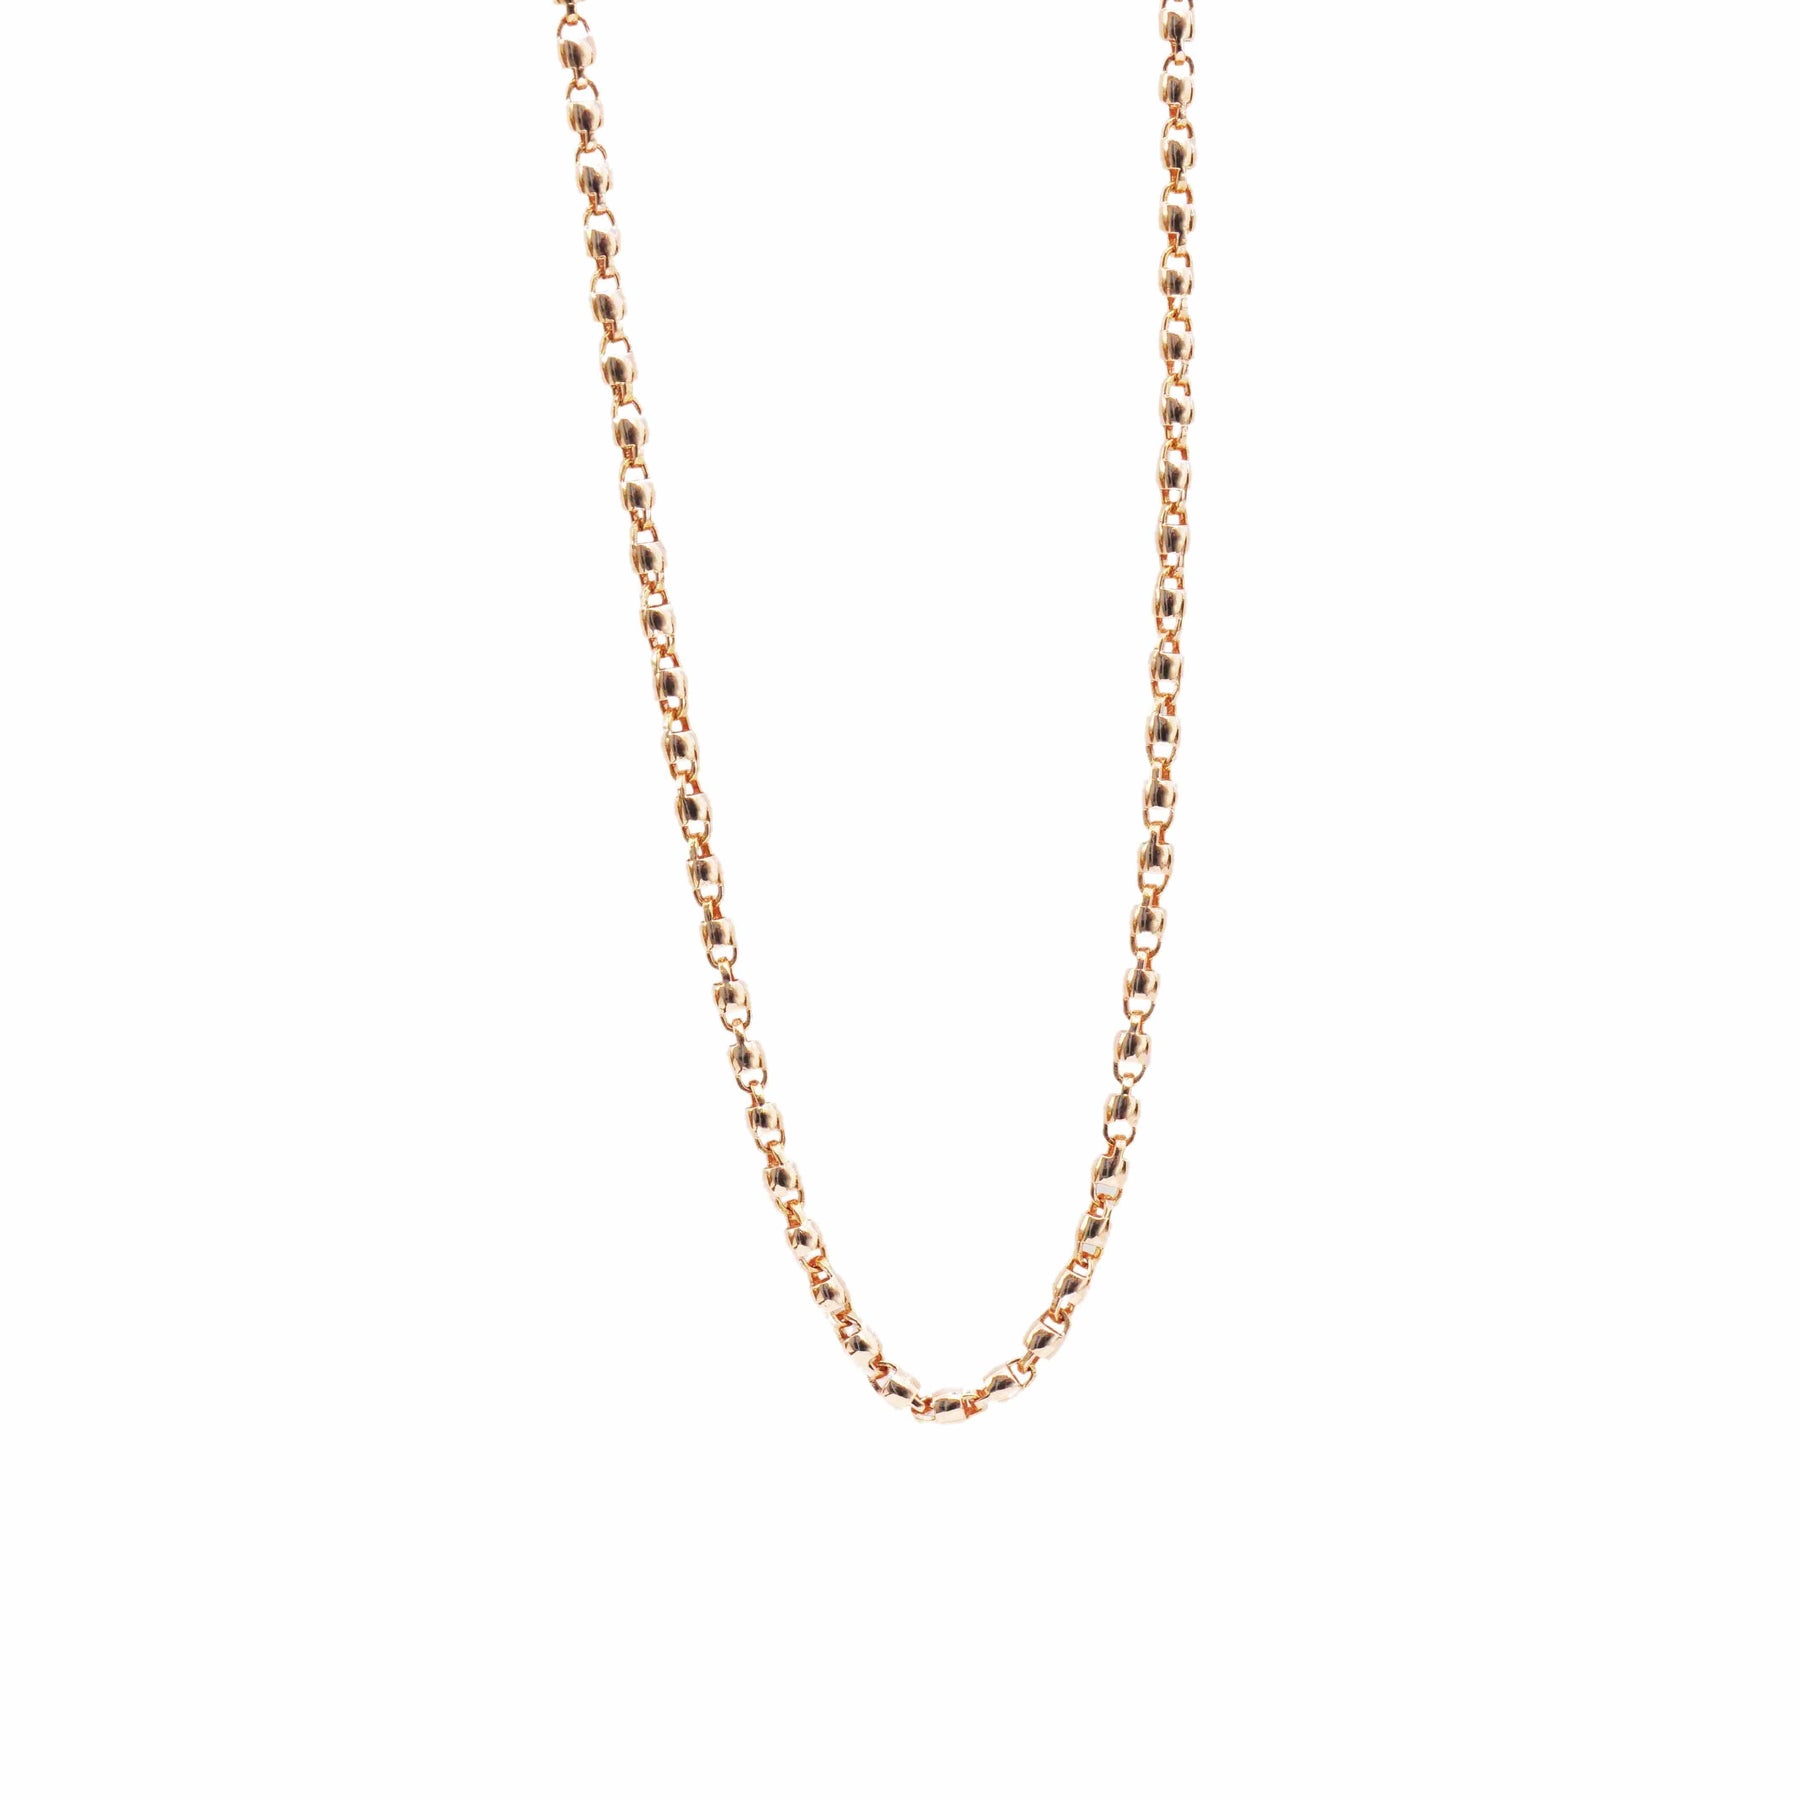 GOLD NECKLACE  - AFRICAN BEAD CHAIN - Chris Aire Fine Jewelry & Timepieces